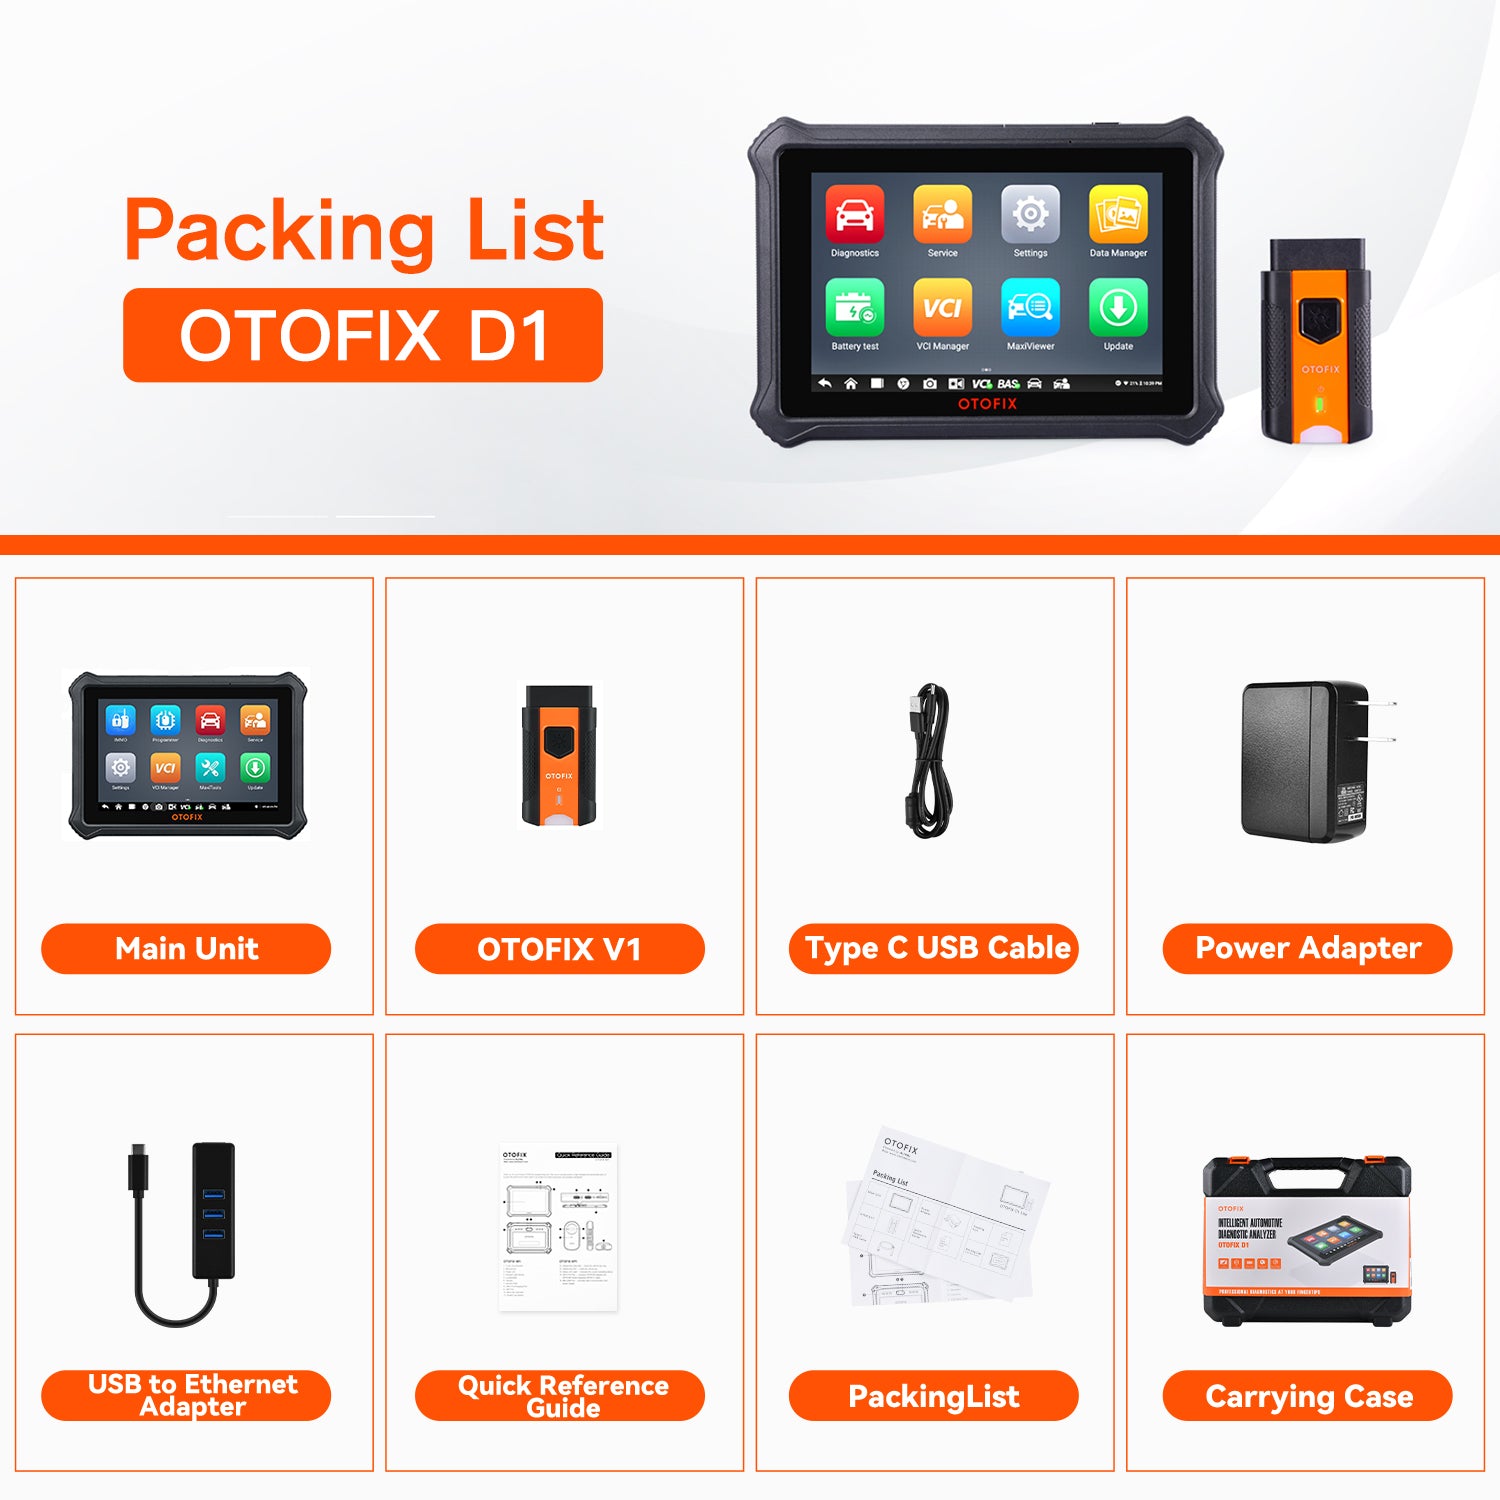 OTOFIX D1 diagnostic tool package list includes Main Unit–OTOFIX D1, OTOFIX V1 (VCI), Type-C USB Cable, Power Adapter, USB to Ethernet Adapter, Quick Reference Guide, Carrying Case